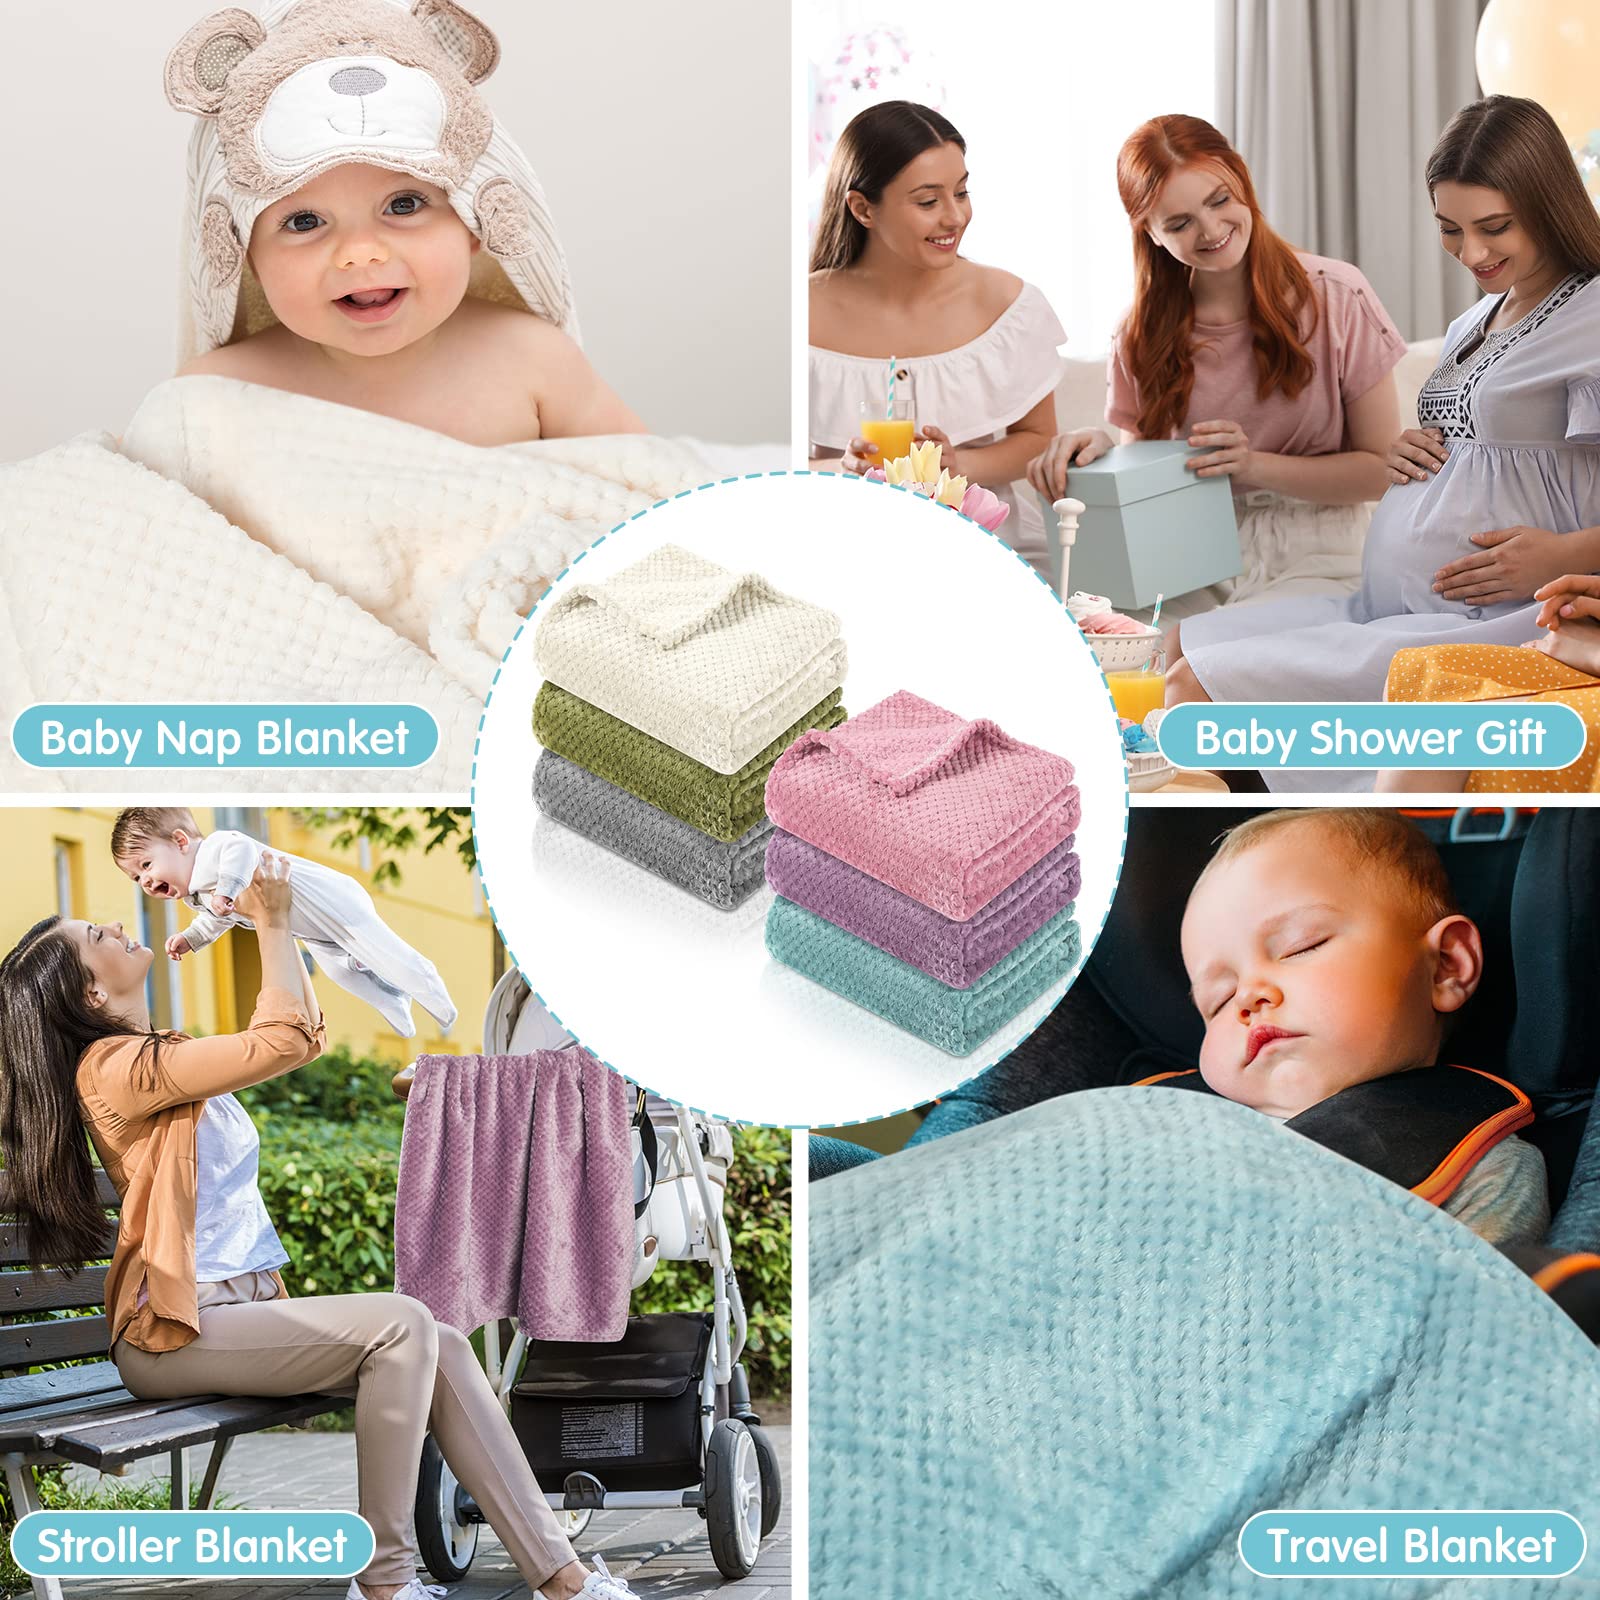 6 Pcs Baby Blanket Flannel Fuzzy Cozy Throw Blankets Soft Warm Fleece Sherpa Blanket for Newborn Infant and Toddler, Nursery Swaddling Blankets for Baby Kids,6 Colors (30 x 40 Inch)